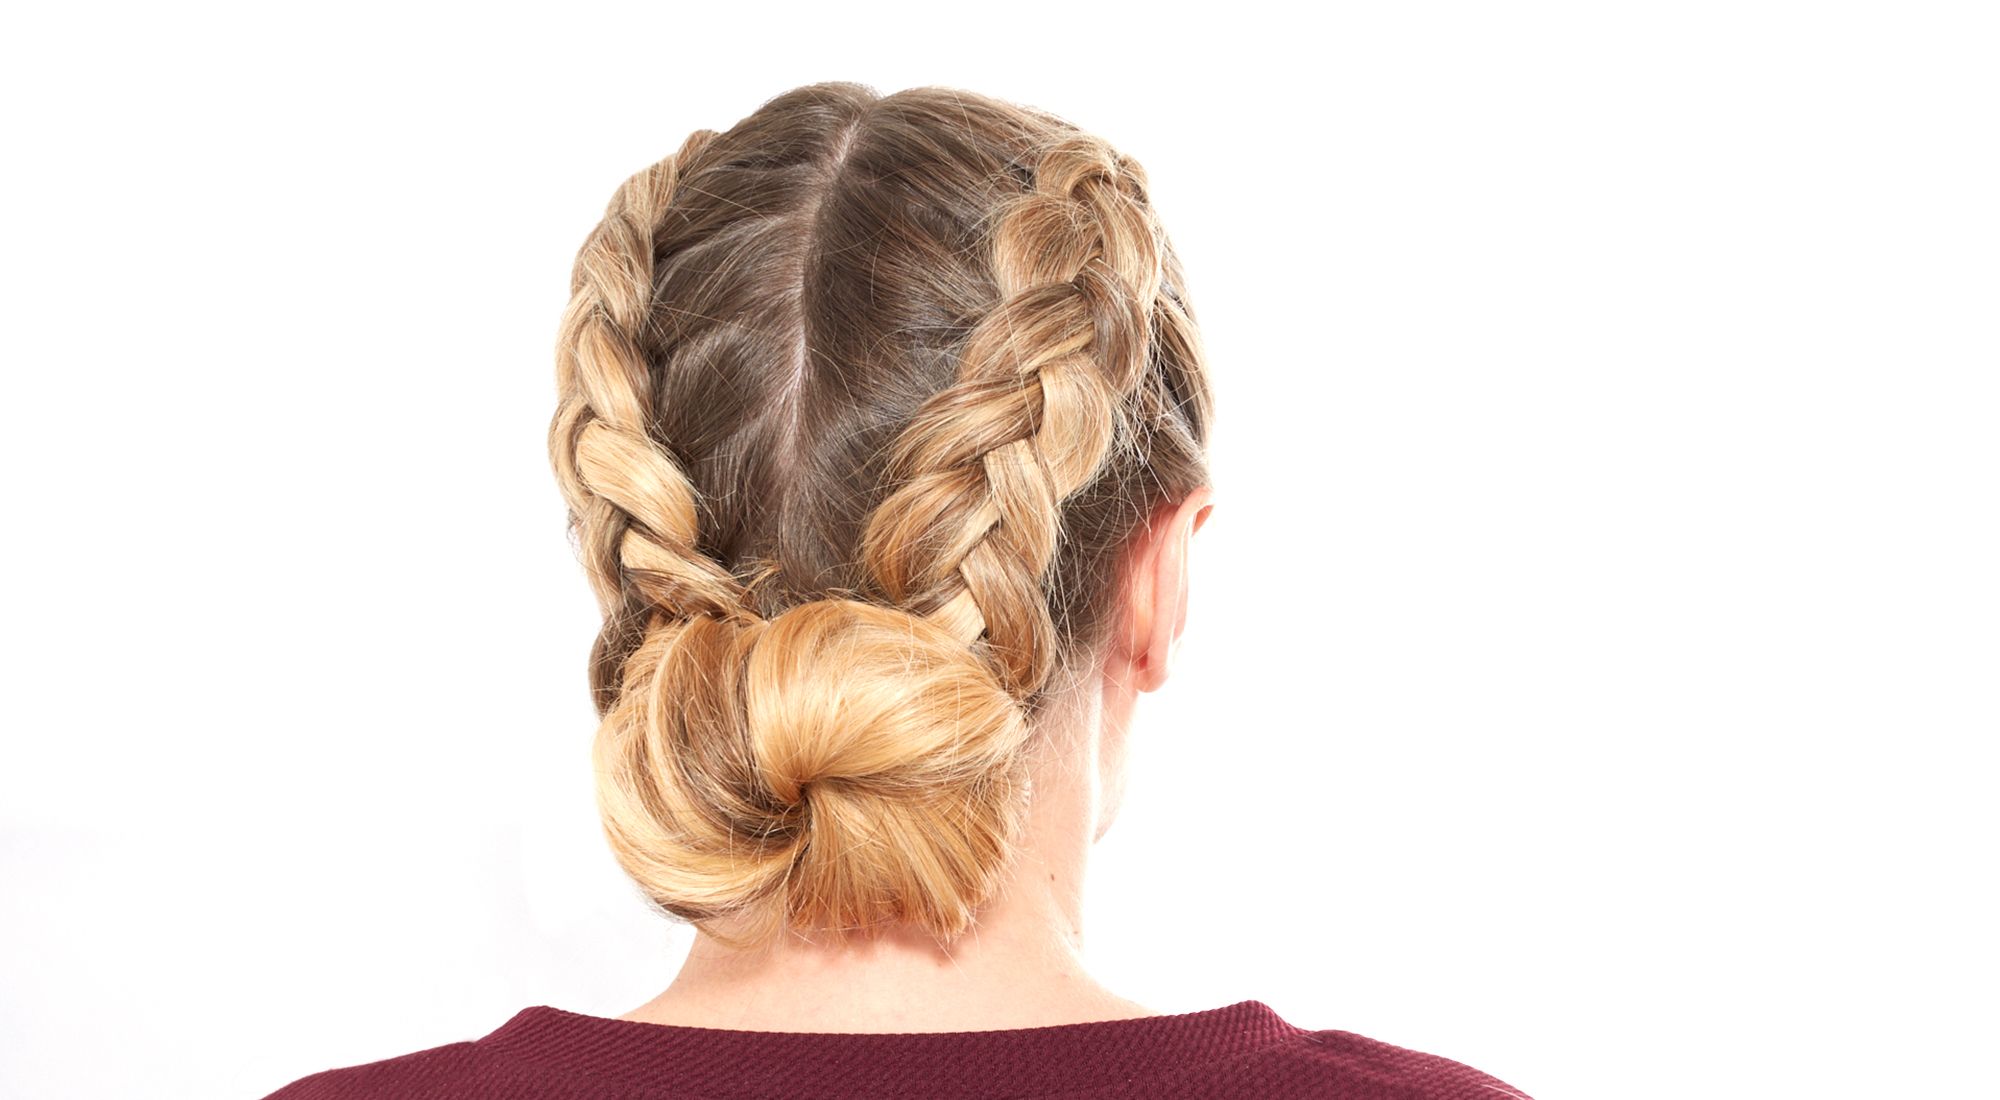 Blow Ltd Intended For Newest Dutch Braid Updo Hairstyles (View 11 of 20)